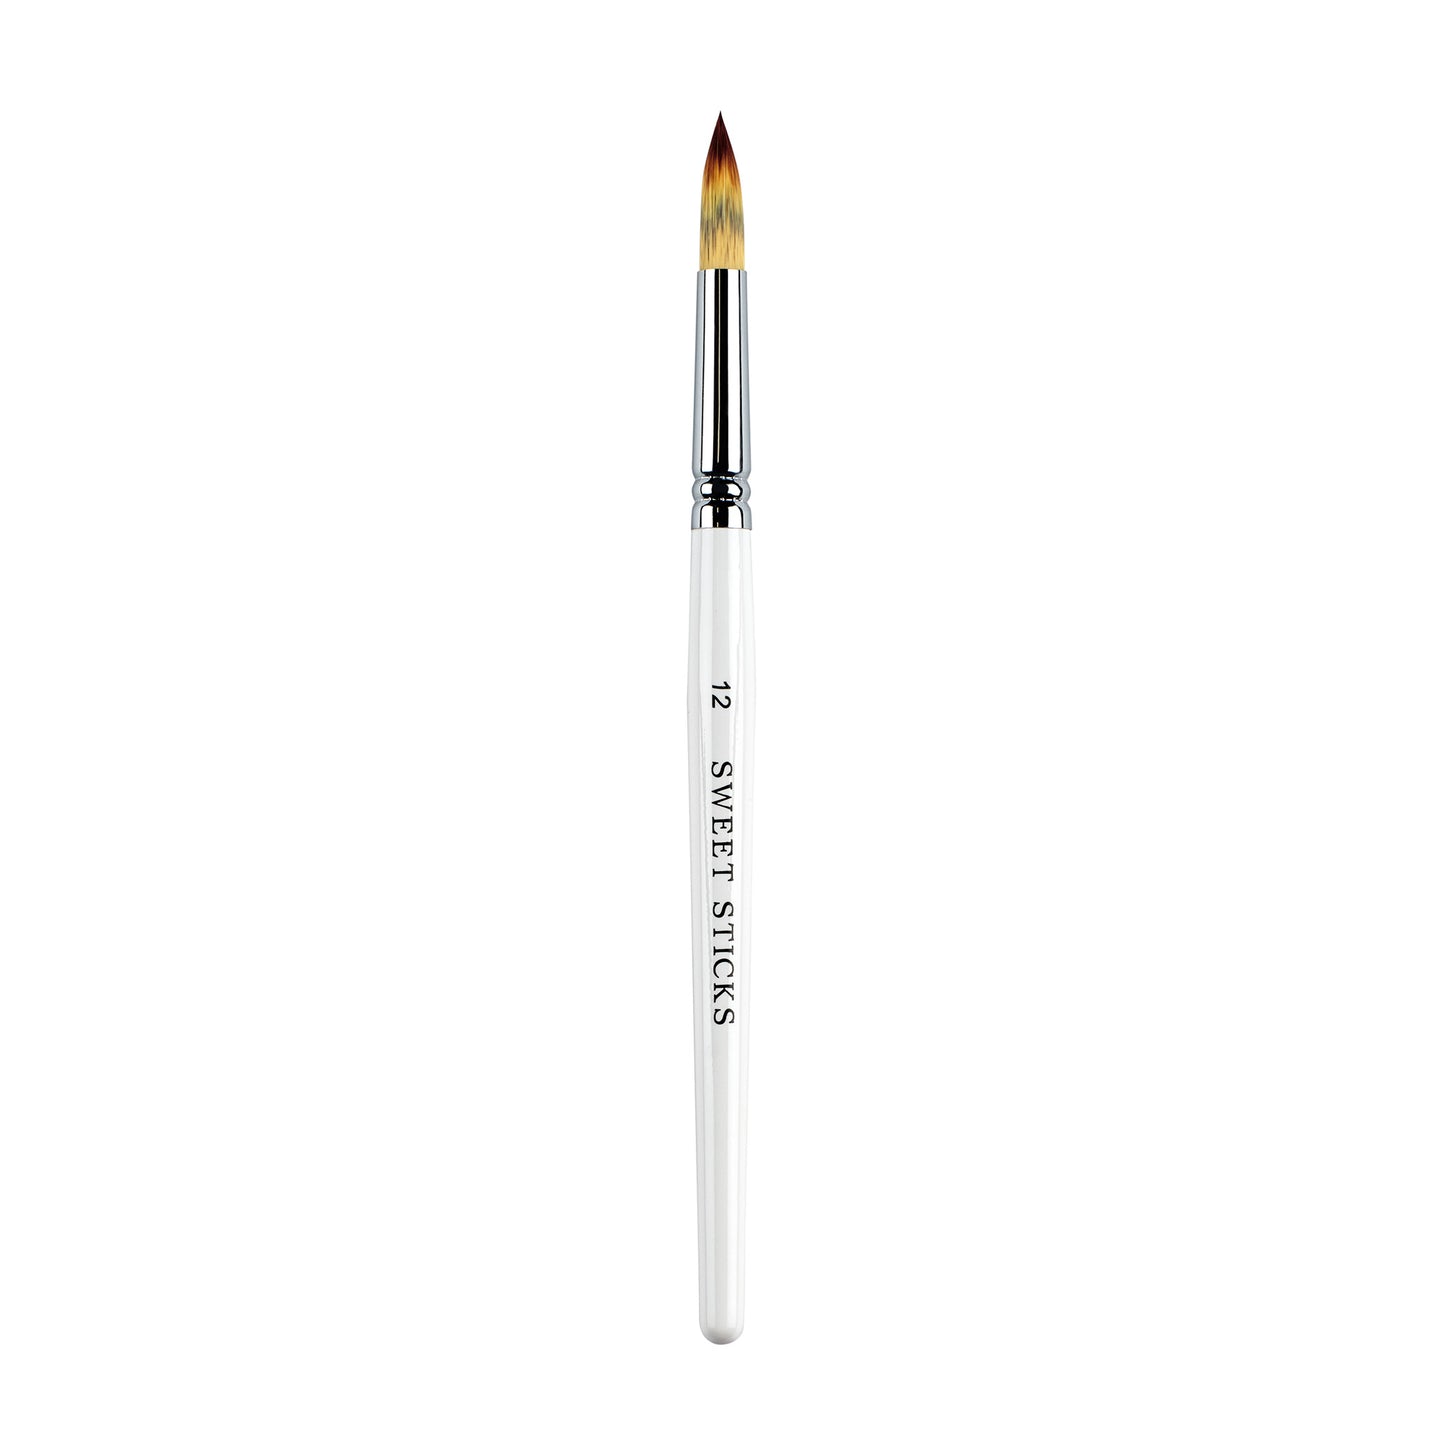 White Pointed Round Paint BRUSH No 12 by Sweet Sticks